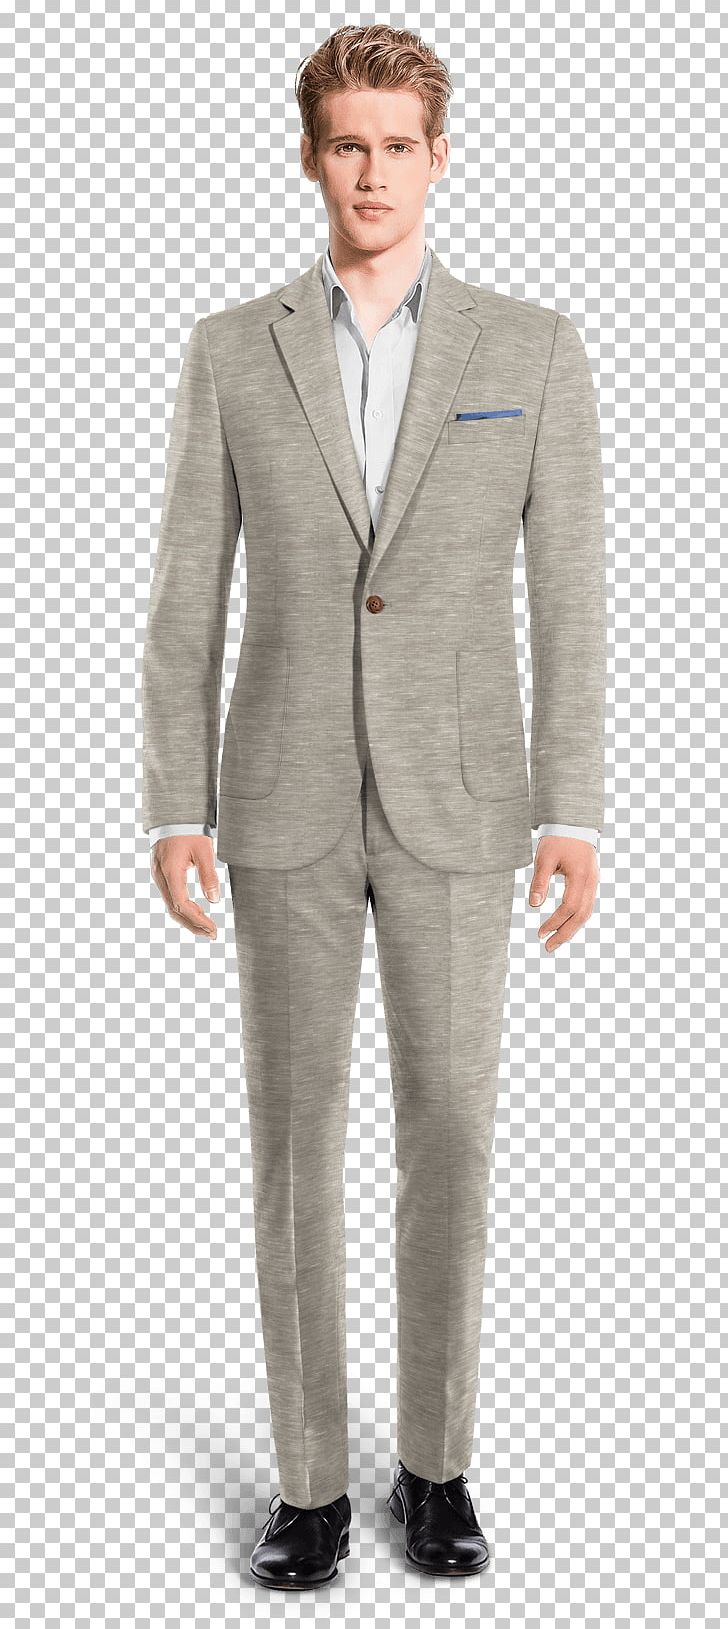 Mao Suit Double-breasted Tuxedo Nehru Jacket PNG, Clipart, Beige, Blazer, Clothing, Doublebreasted, Fashion Free PNG Download